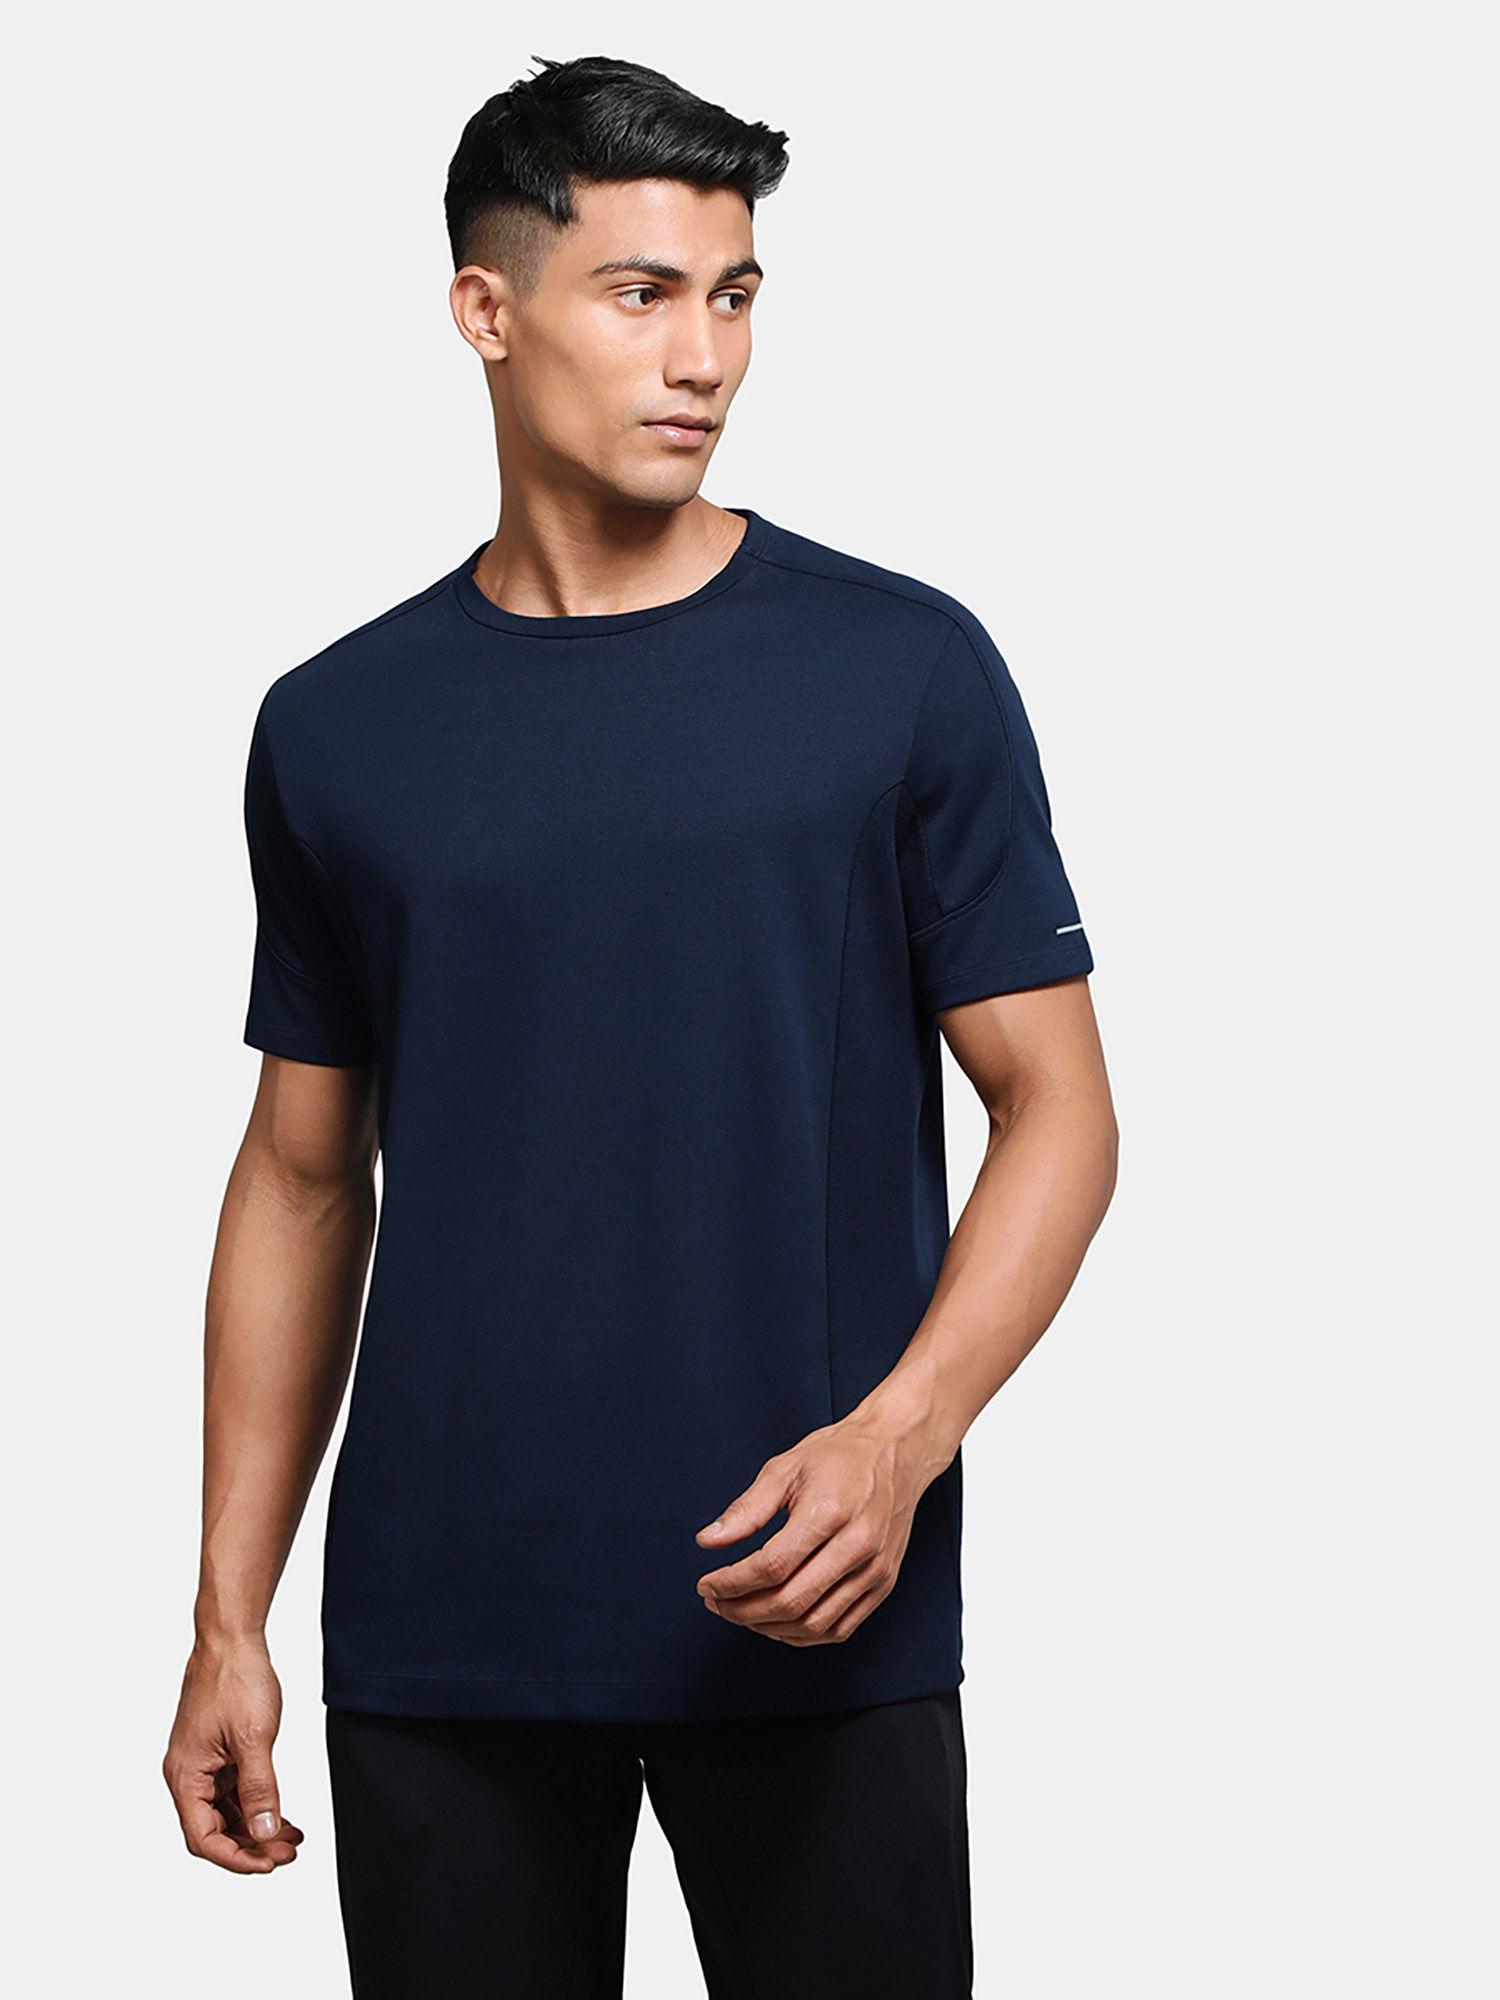 mv01-mens-cotton-blend-solid-round-neck-t-shirt-with-stay-fresh-treatment-navy